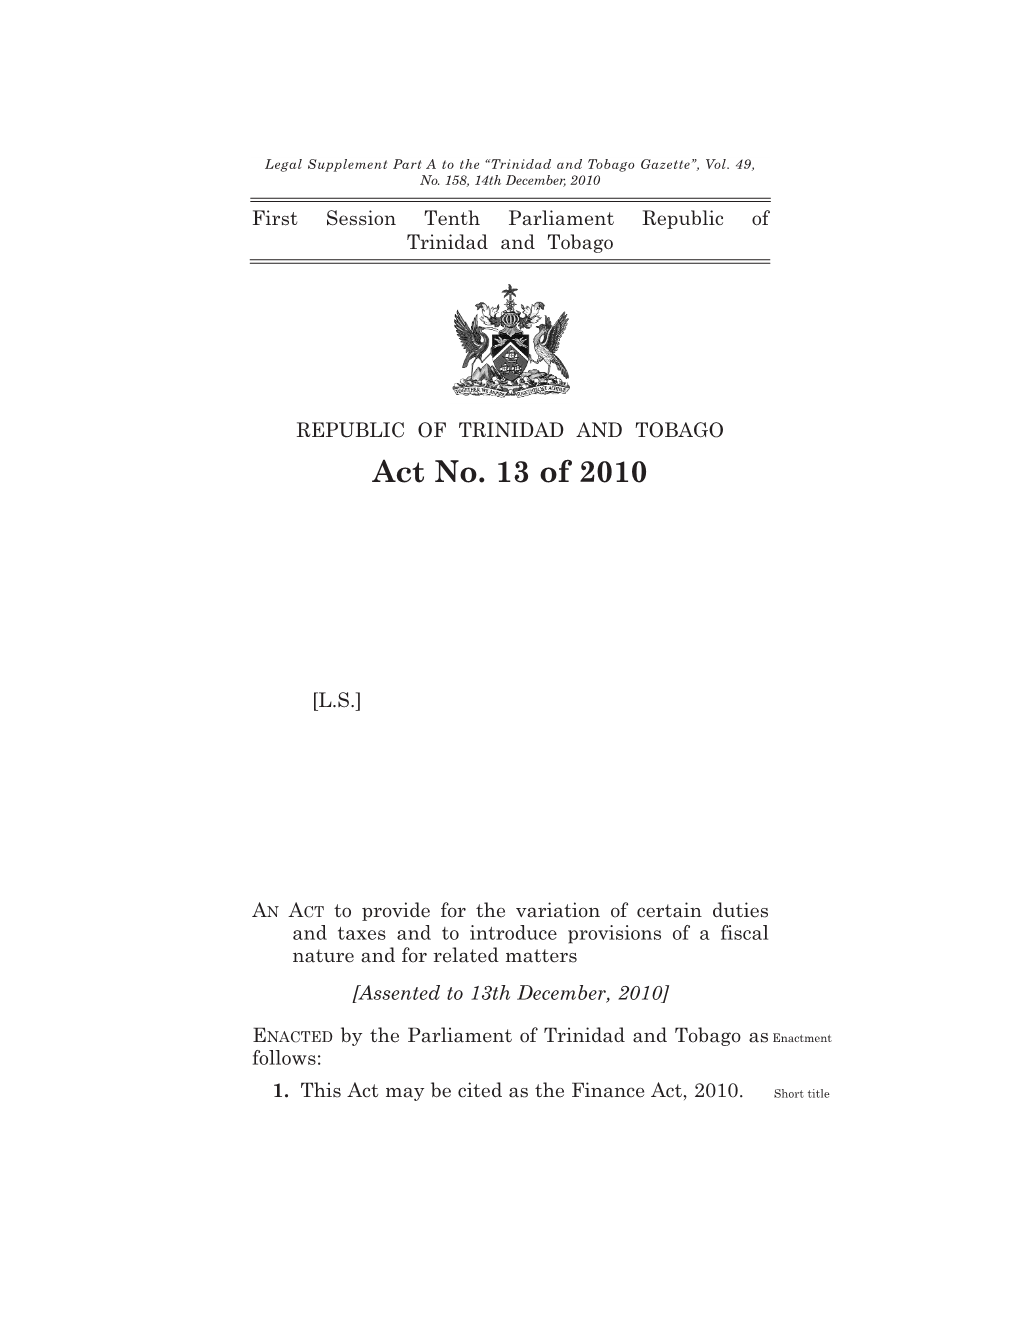 The Finance Act, 2010